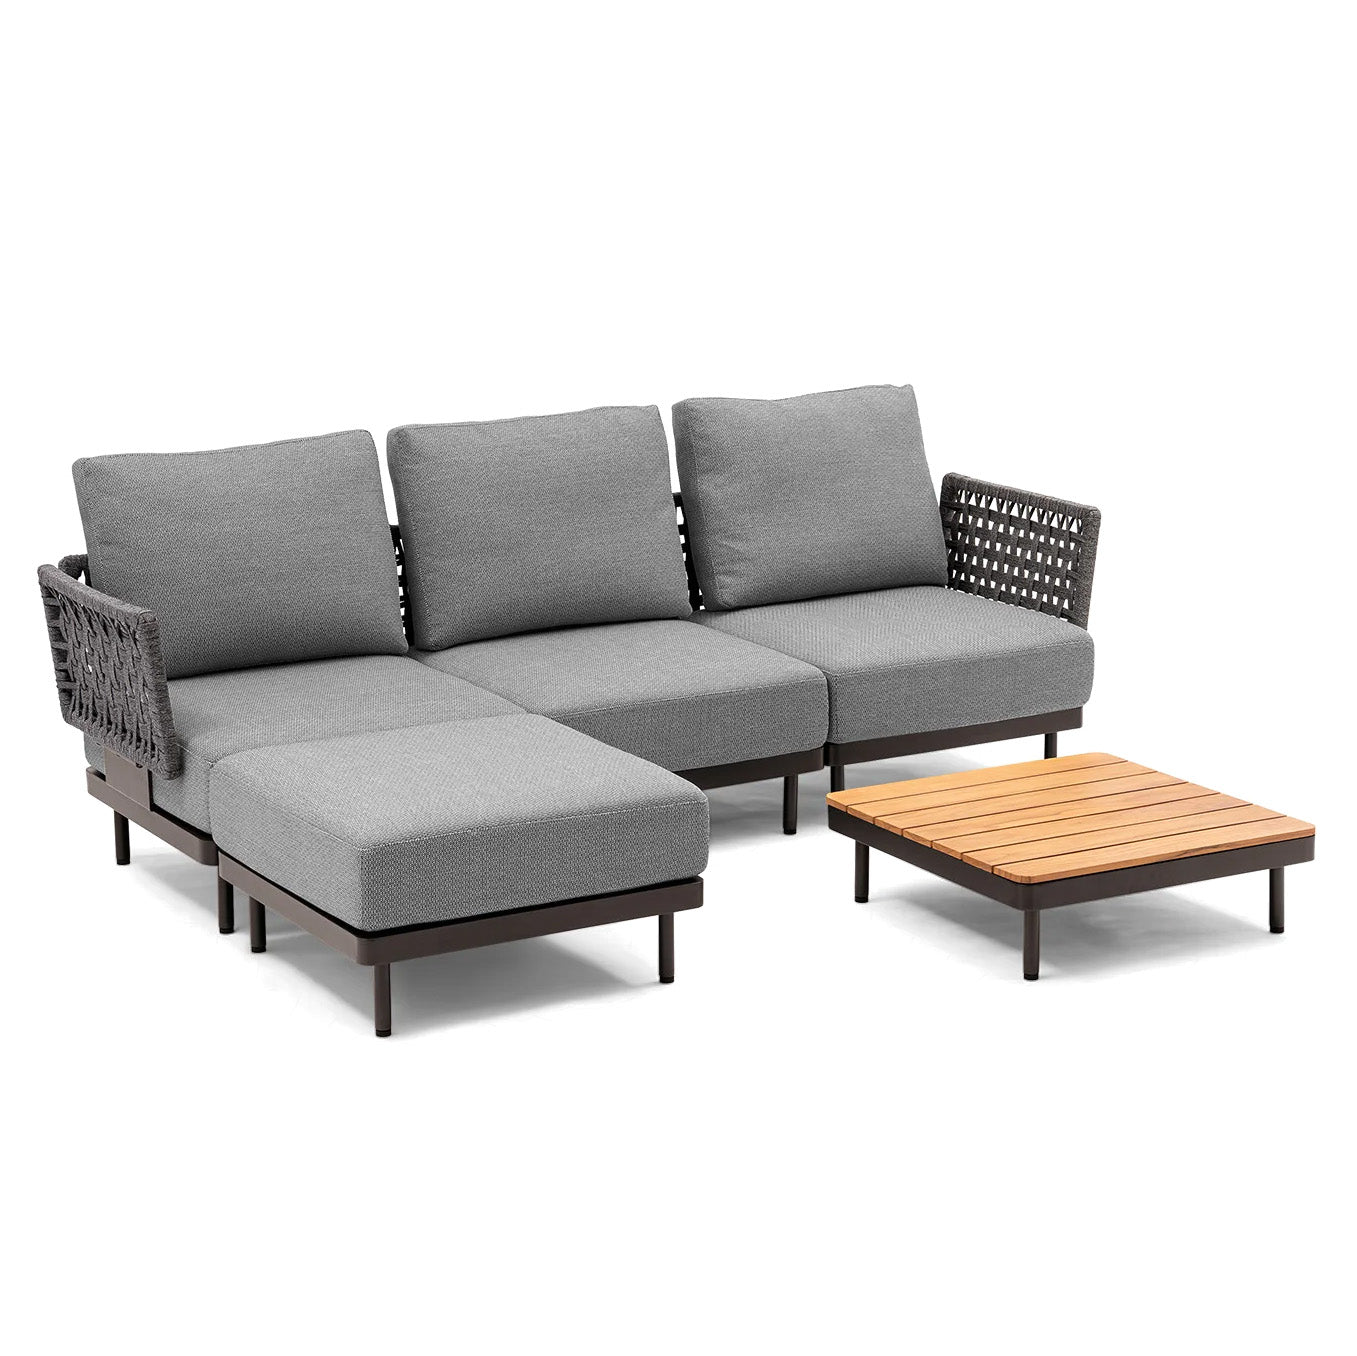 Patio Woven Rattan Sectional Couch Set